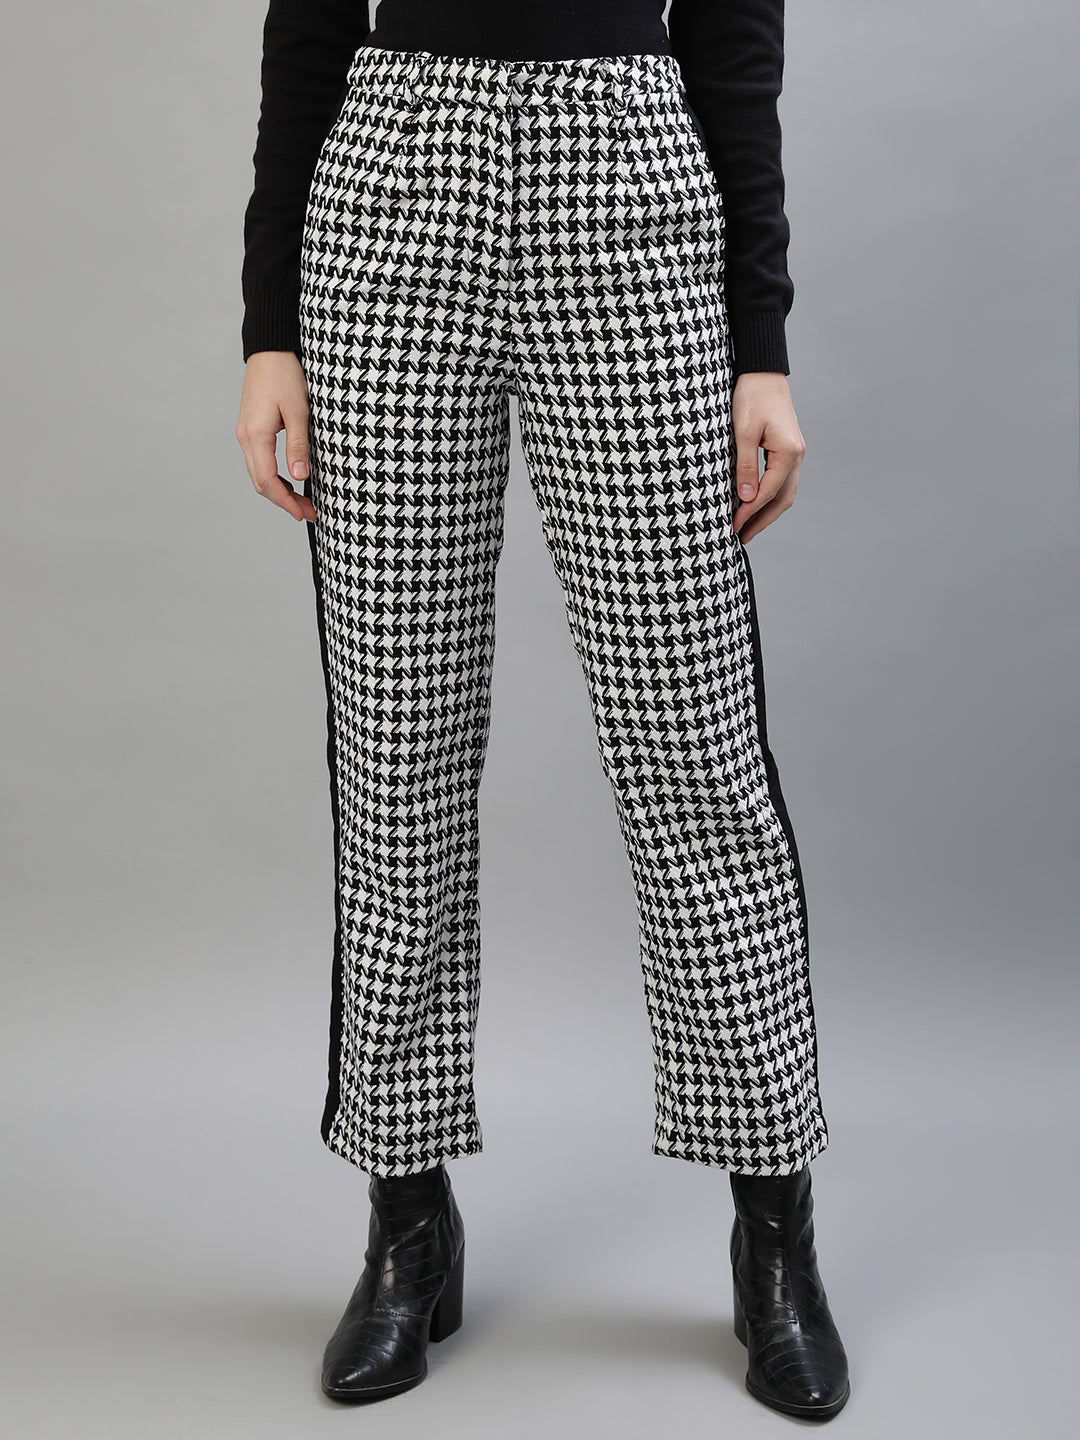 Lanvin Formal Trousers & Hight Waist Pants for Women sale - discounted  price | FASHIOLA.in